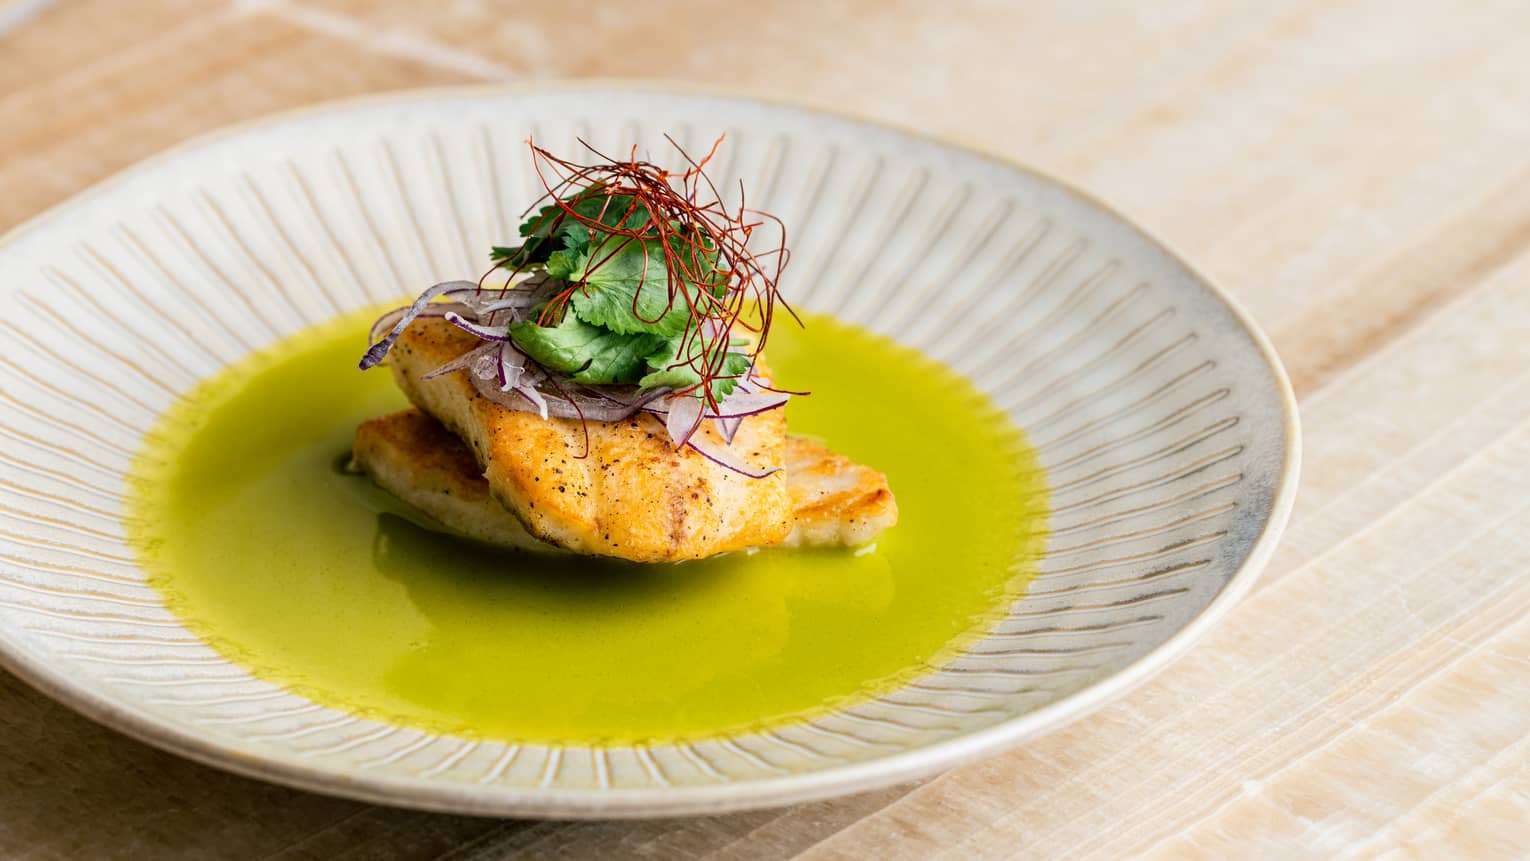 Roasted Turbot topped with Sliced Red Onion, Cilantro Leaves and Saffron threads in a pool of green Jalepeño Sauce